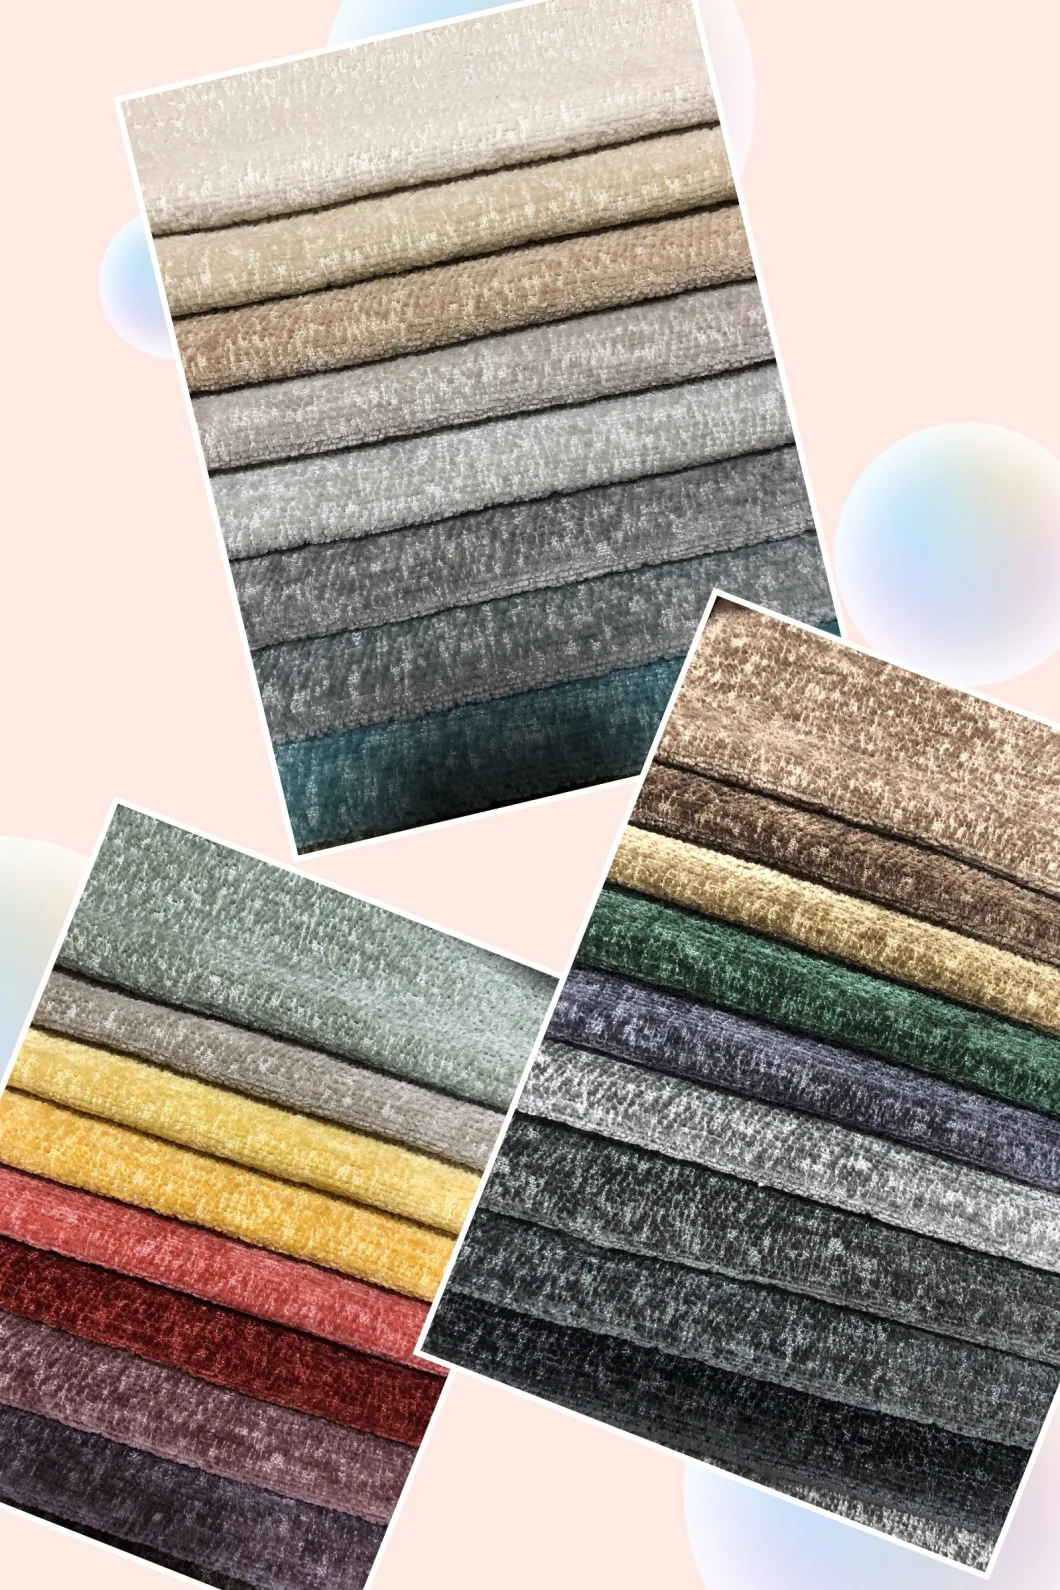 100%Polyester Chenille Fabric Sofa Fabric Upholstery Fabric Furniture Fabric (ZN232)